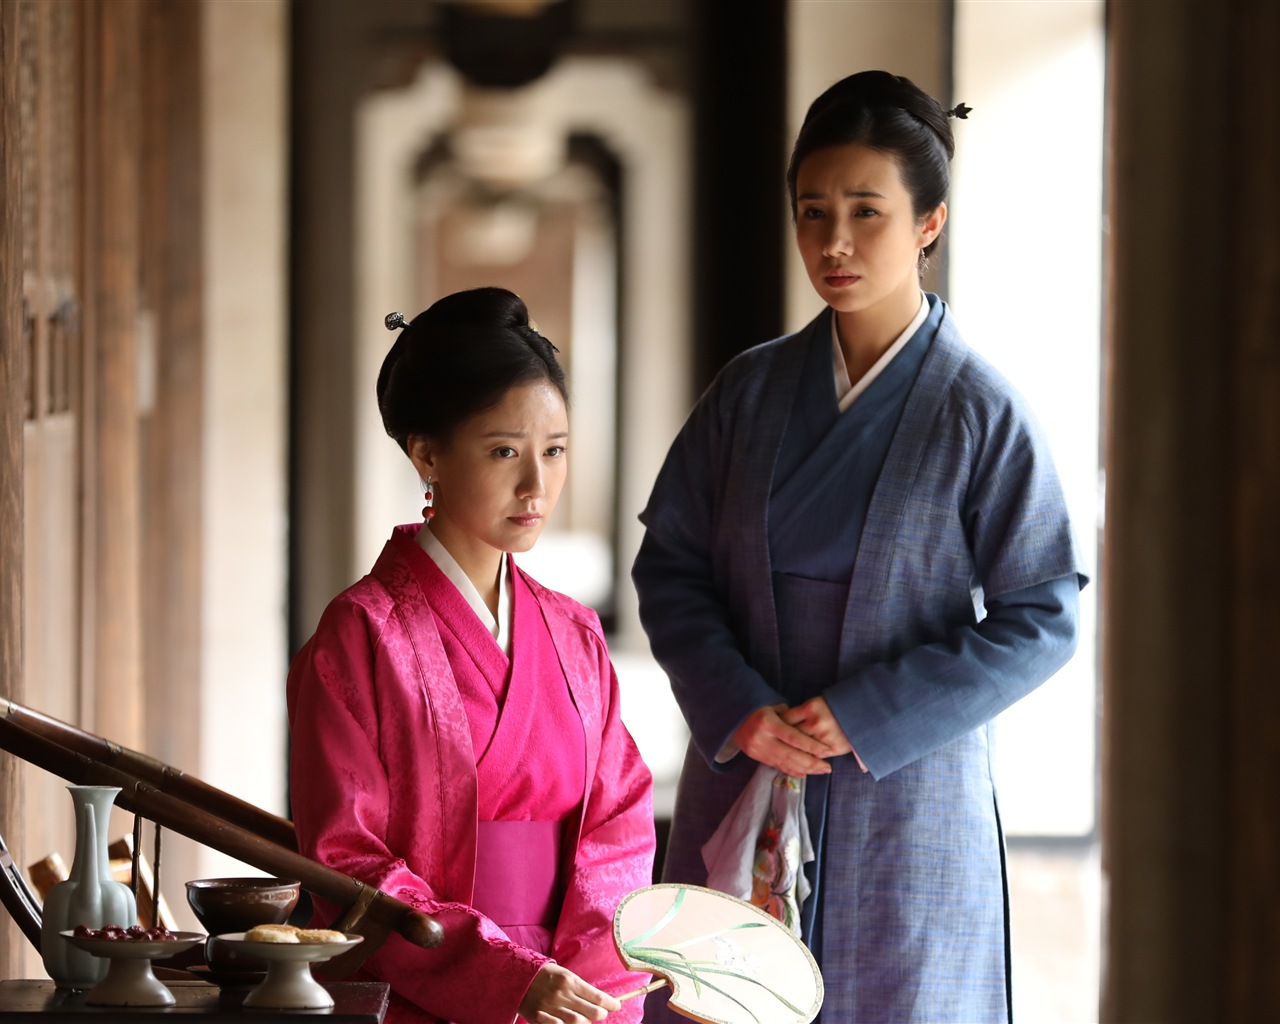 The Story Of MingLan, TV series HD wallpapers #8 - 1280x1024